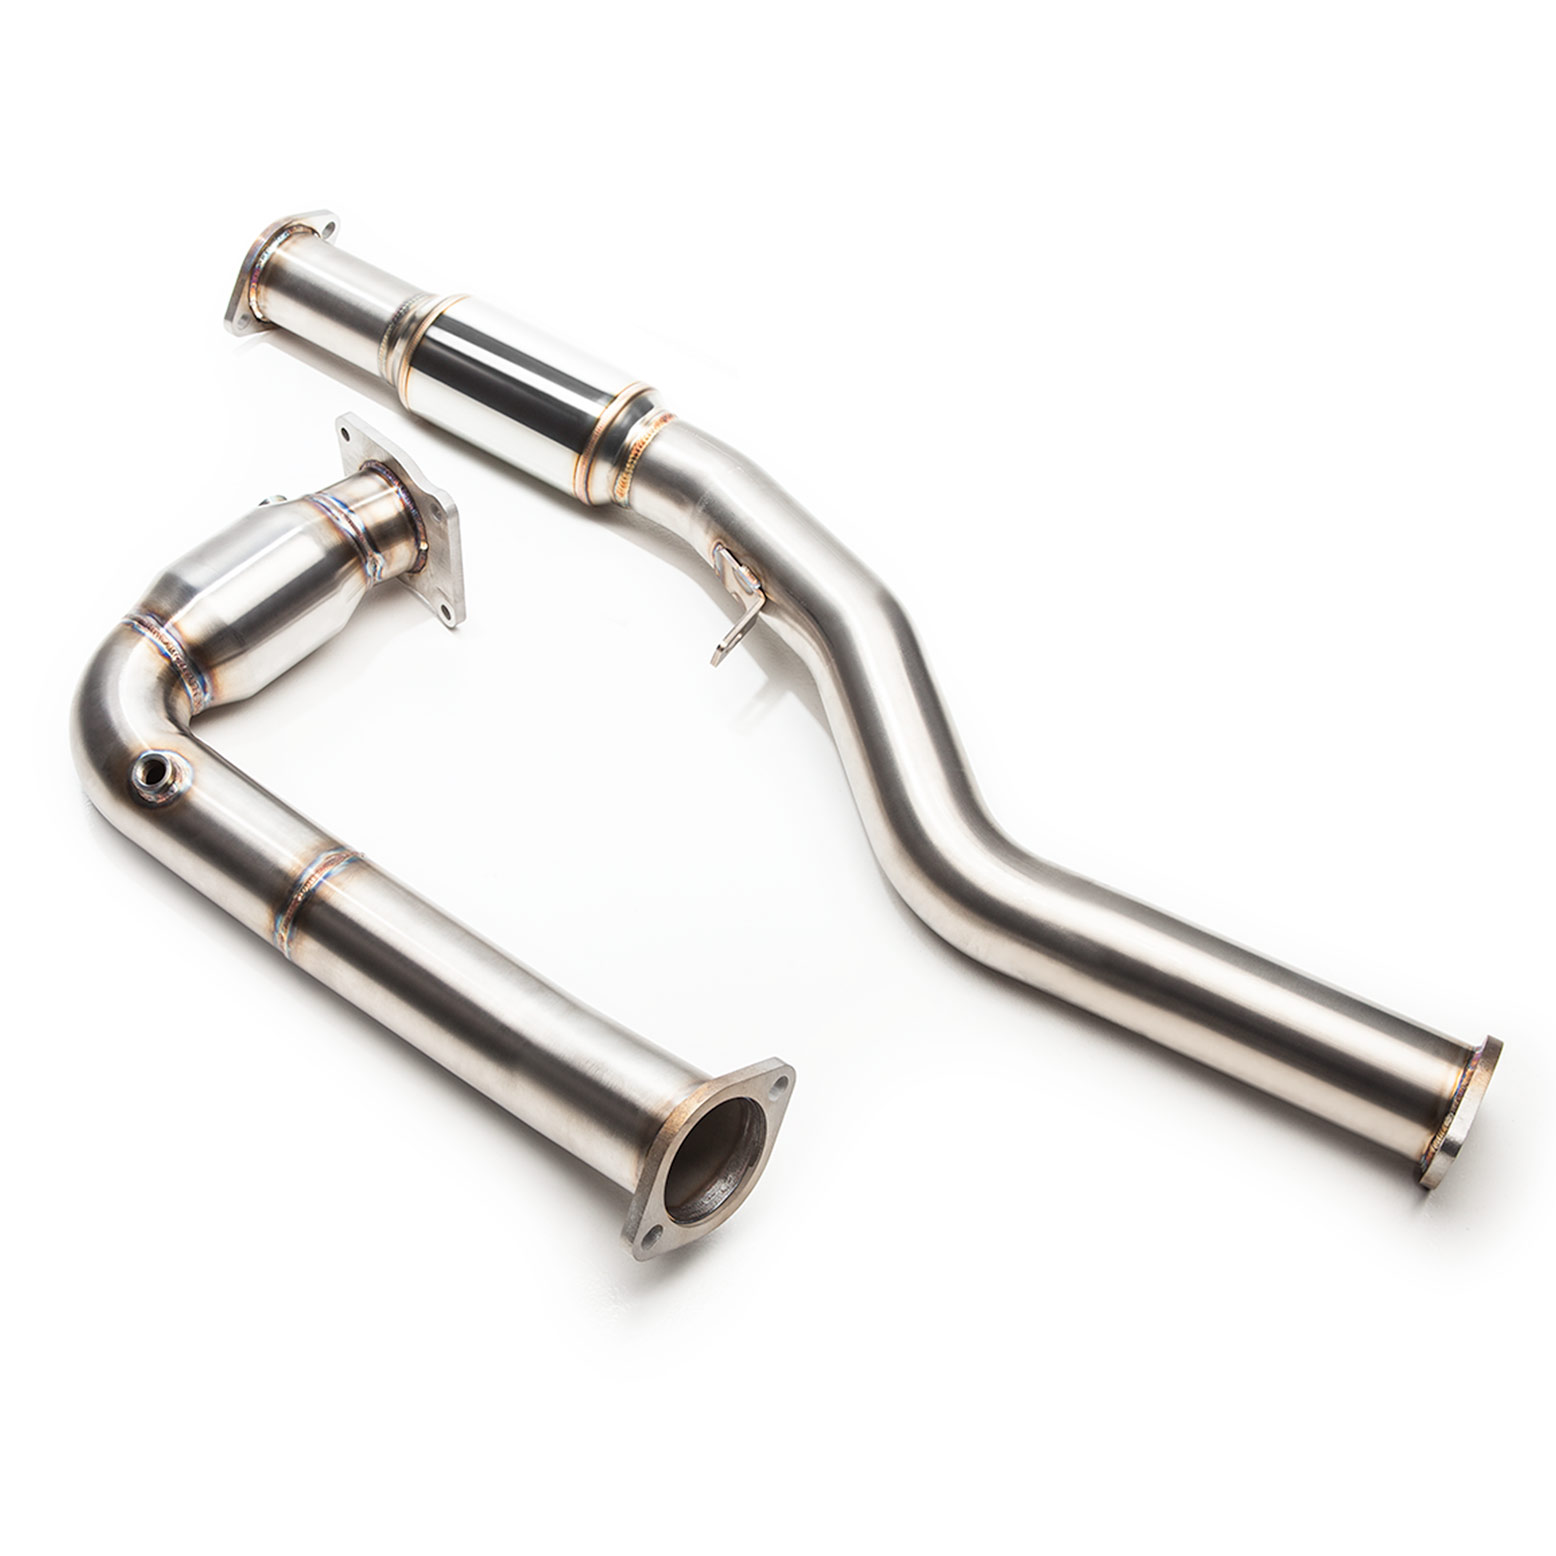 Cobb Catted Resonated J-Pipe / Downpipe for 2019 WRX